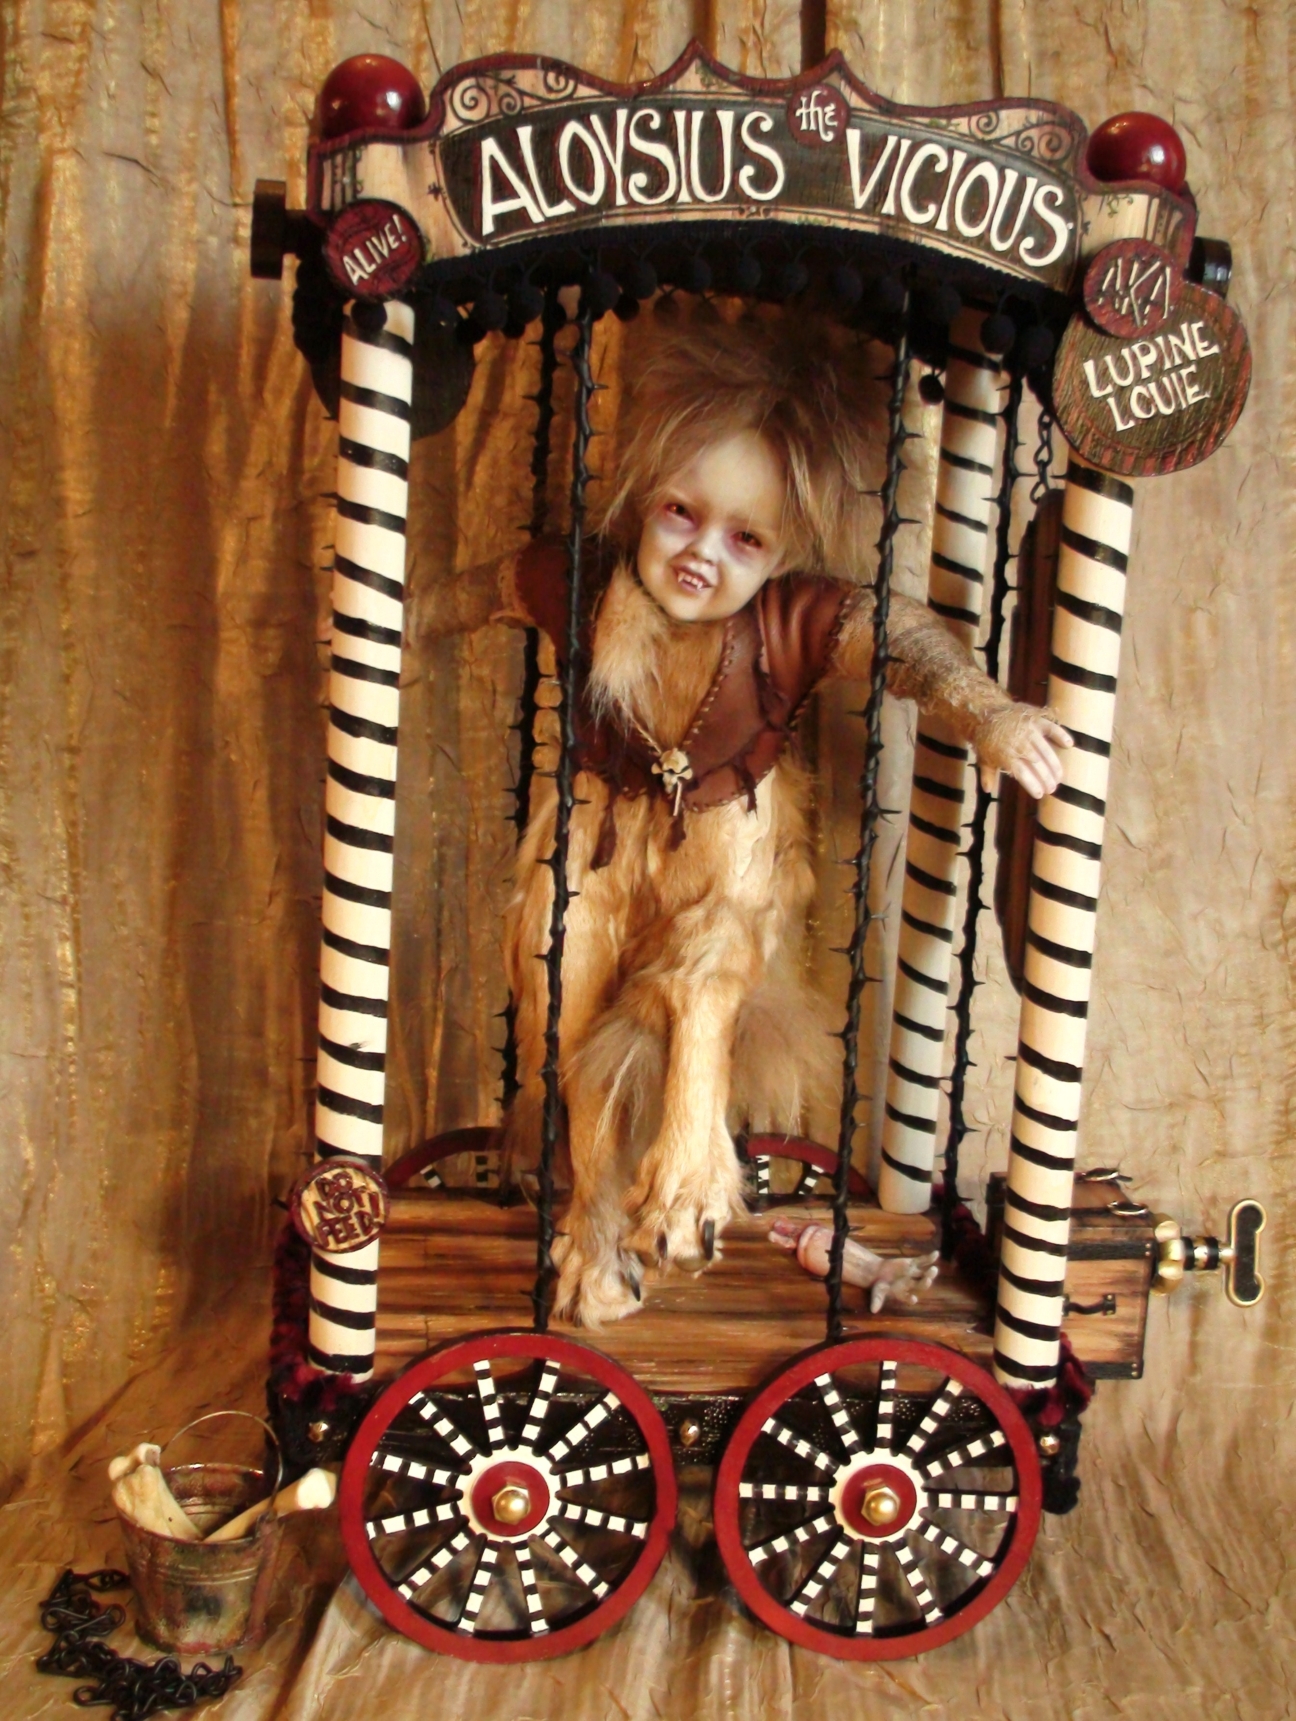 artdoll of a watchdog boy wolf boy sideshow attraction taxidermy assemblage in a cage carnival cart pull toy with hand painted signs and wheels